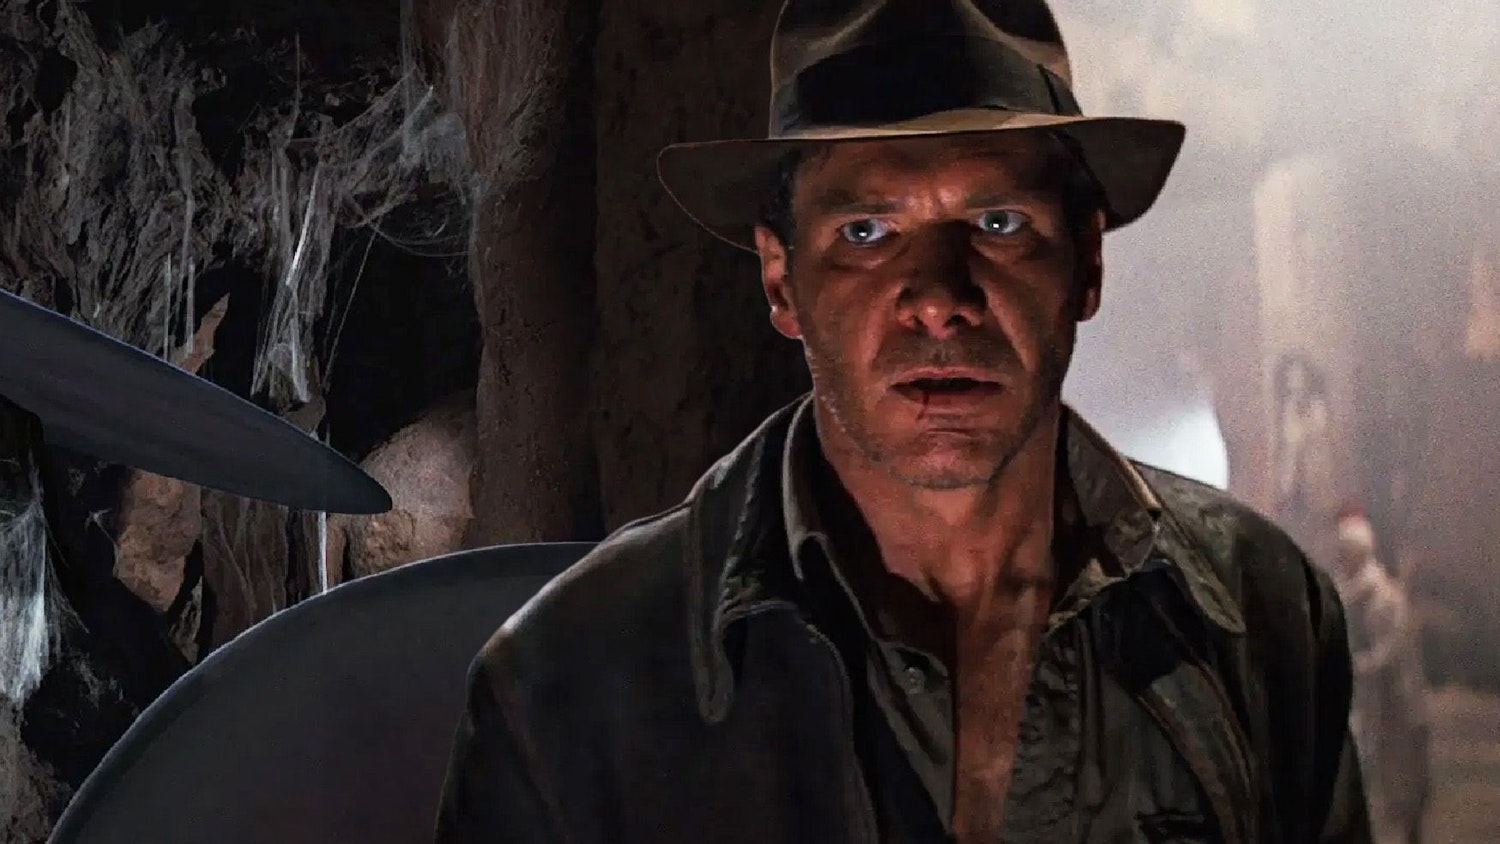 Indiana Jones 5's Opening Sequence De-Ages Harrison Ford To Original  Trilogy Indy – Exclusive, Movies